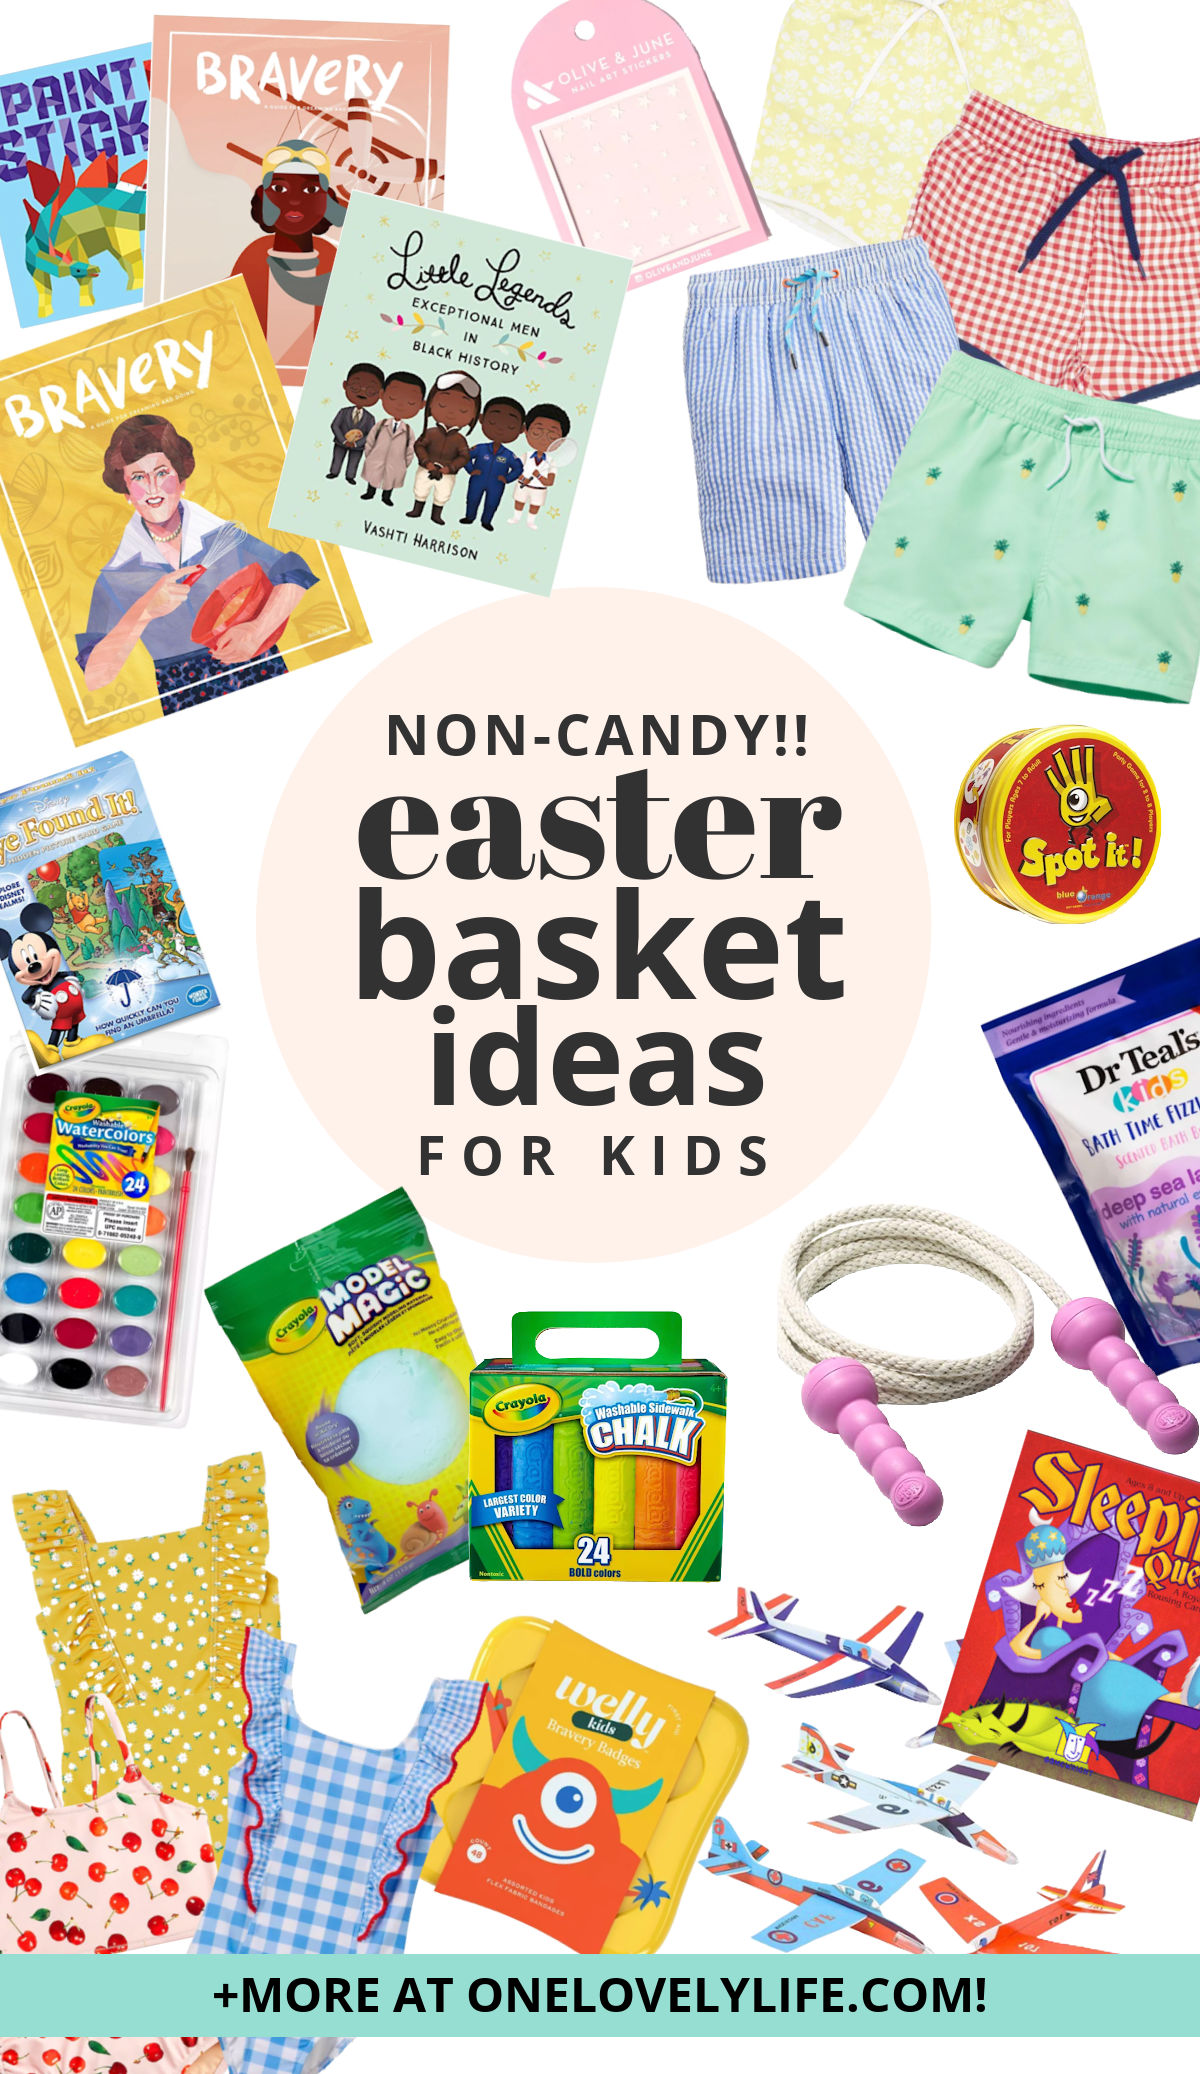 A collage of non-candy Easter basket ideas for kids 